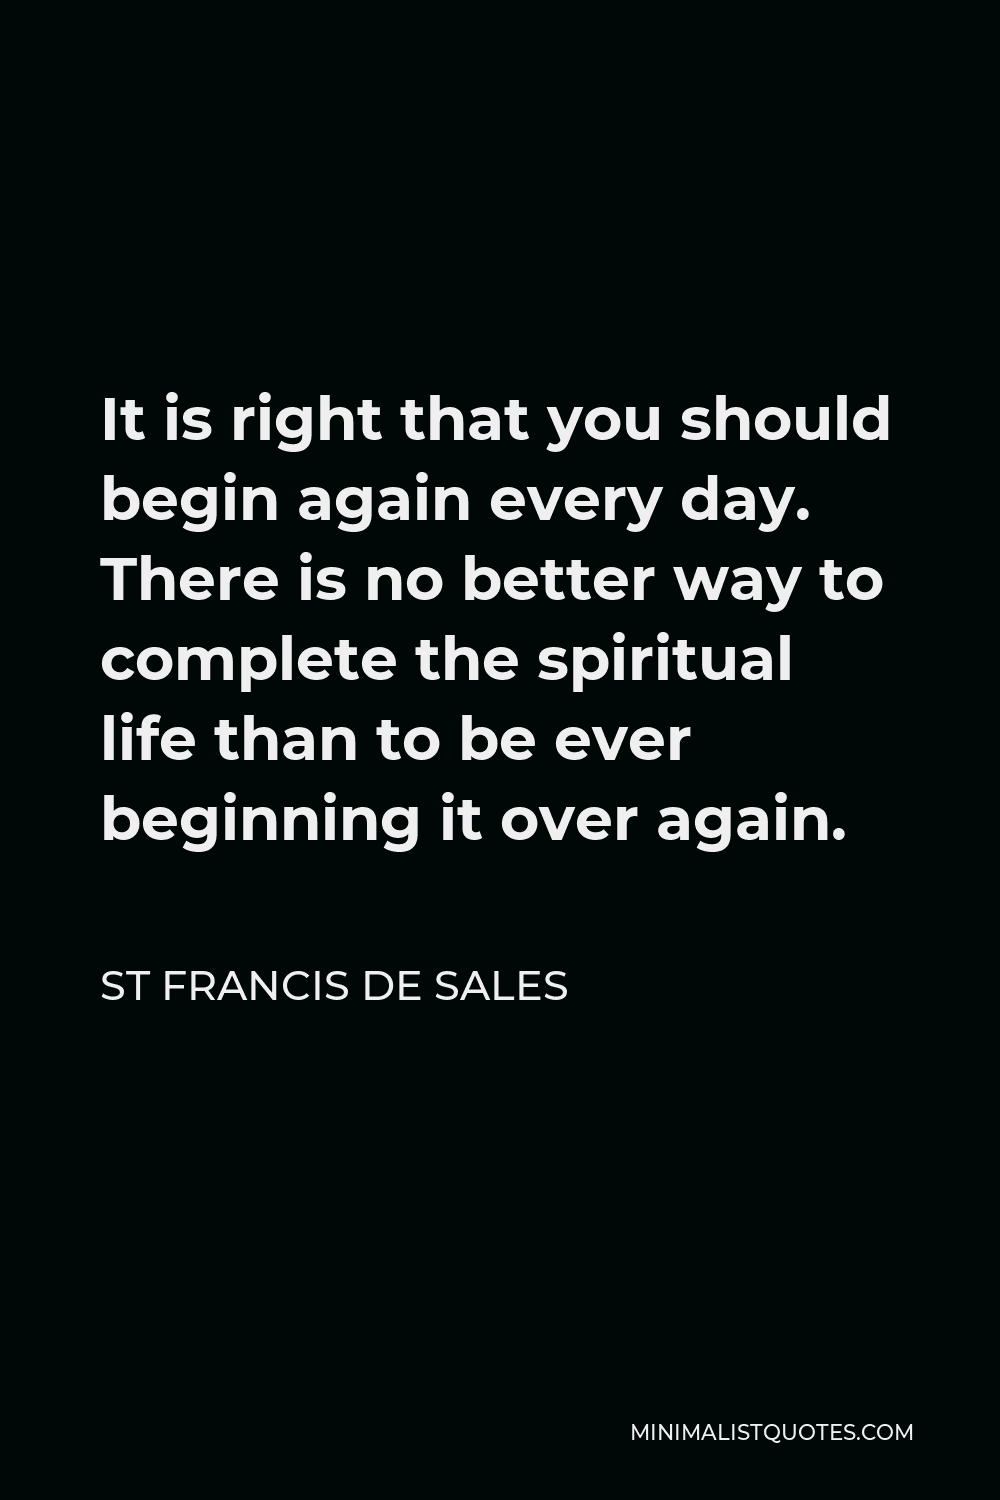 St Francis De Sales Quote - It is right that you should begin again every day. There is no better way to complete the spiritual life than to be ever beginning it over again.